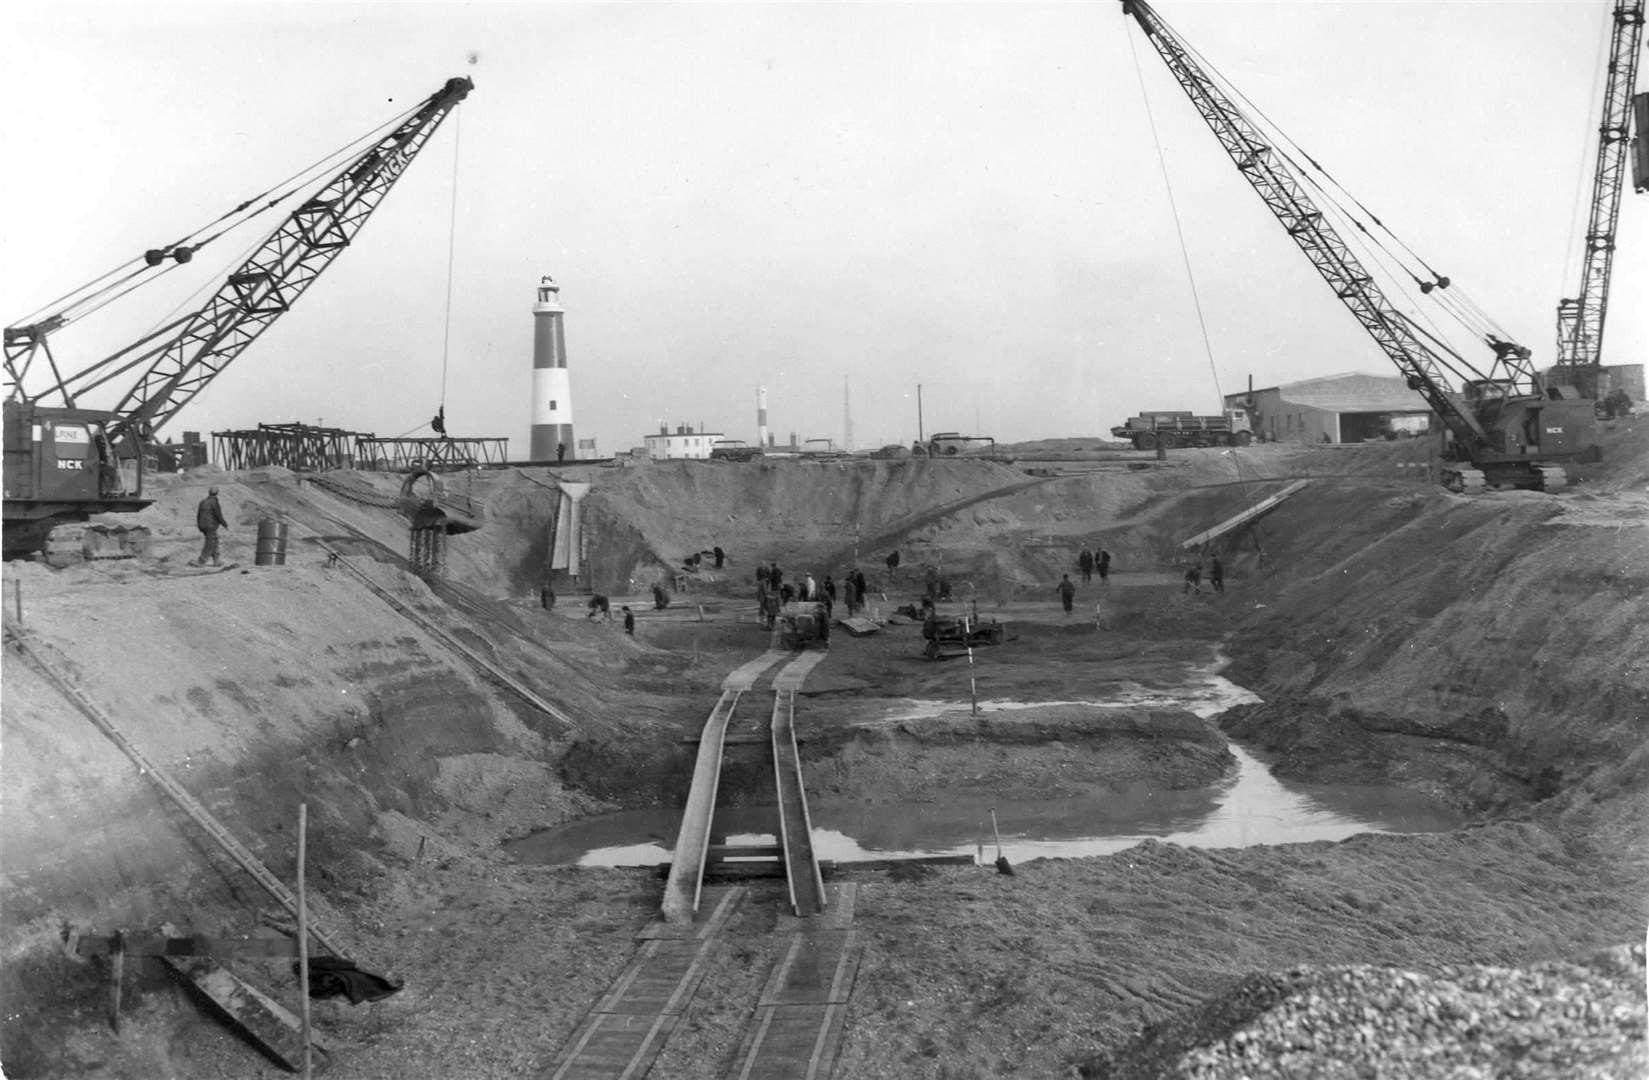 Early stages of laying the foundations of the power station in 1961